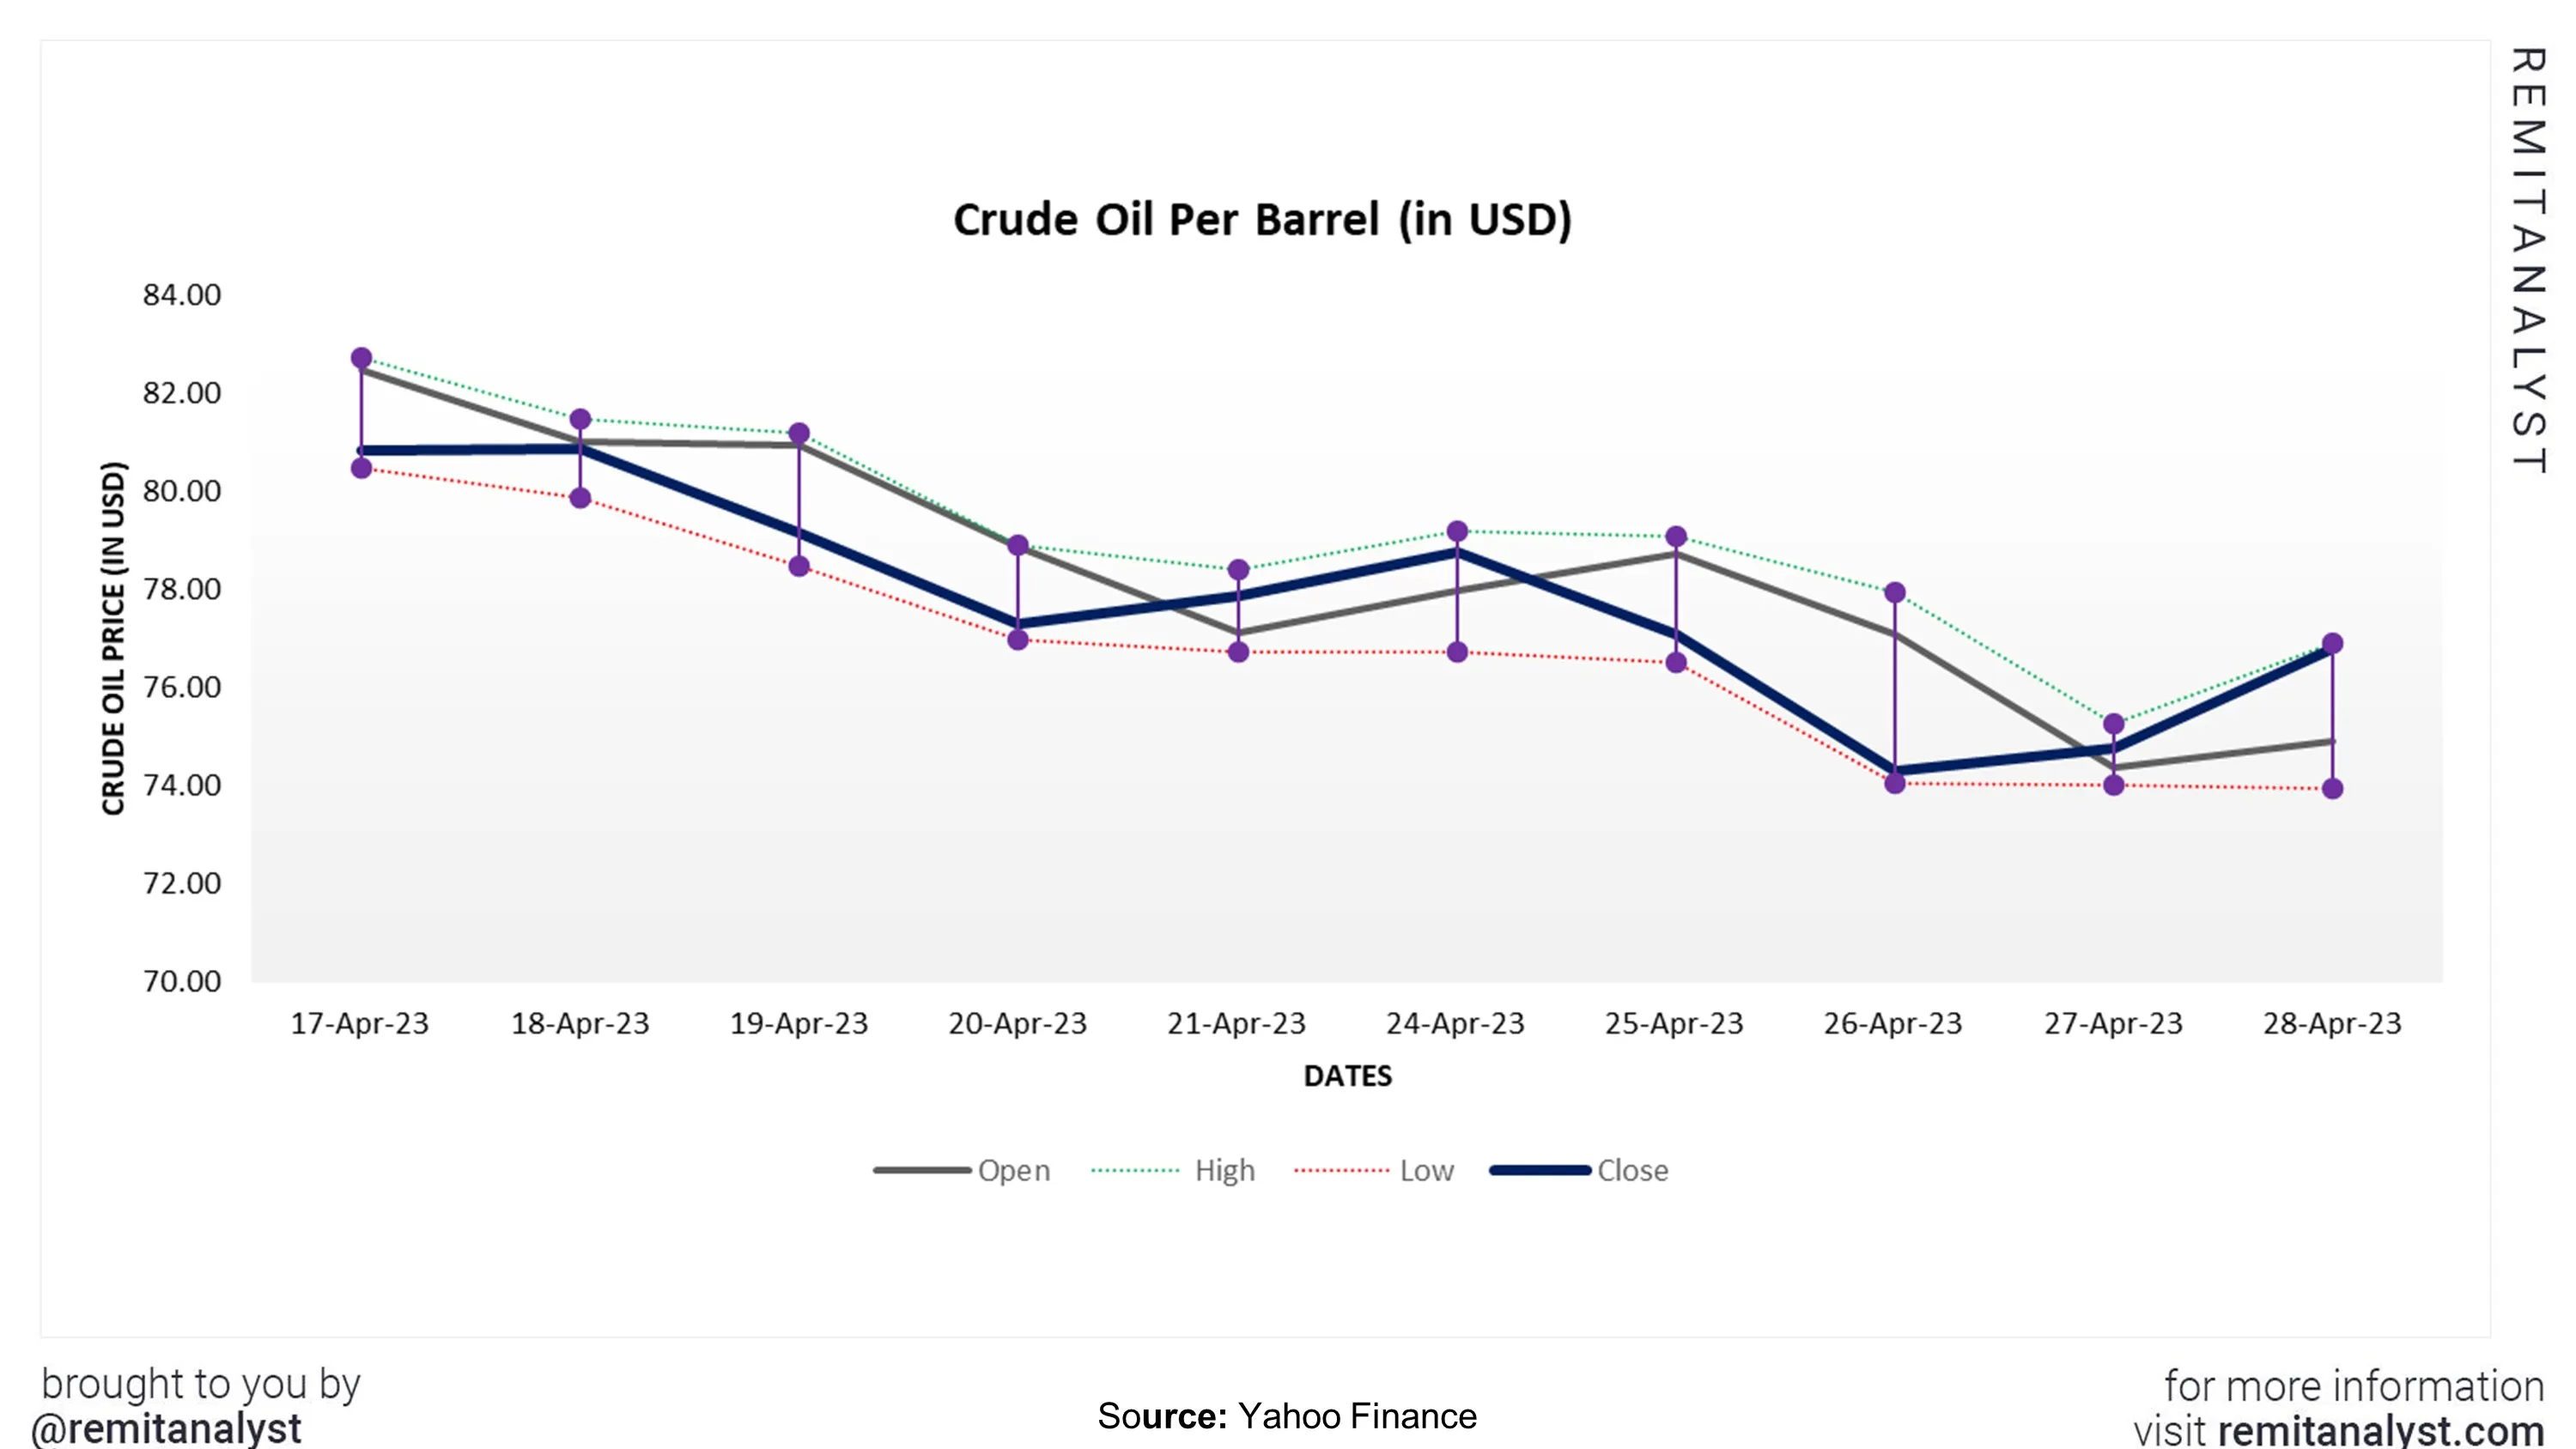 crude-oil-prices-from-17-apr-2023-to-28-apr-2023